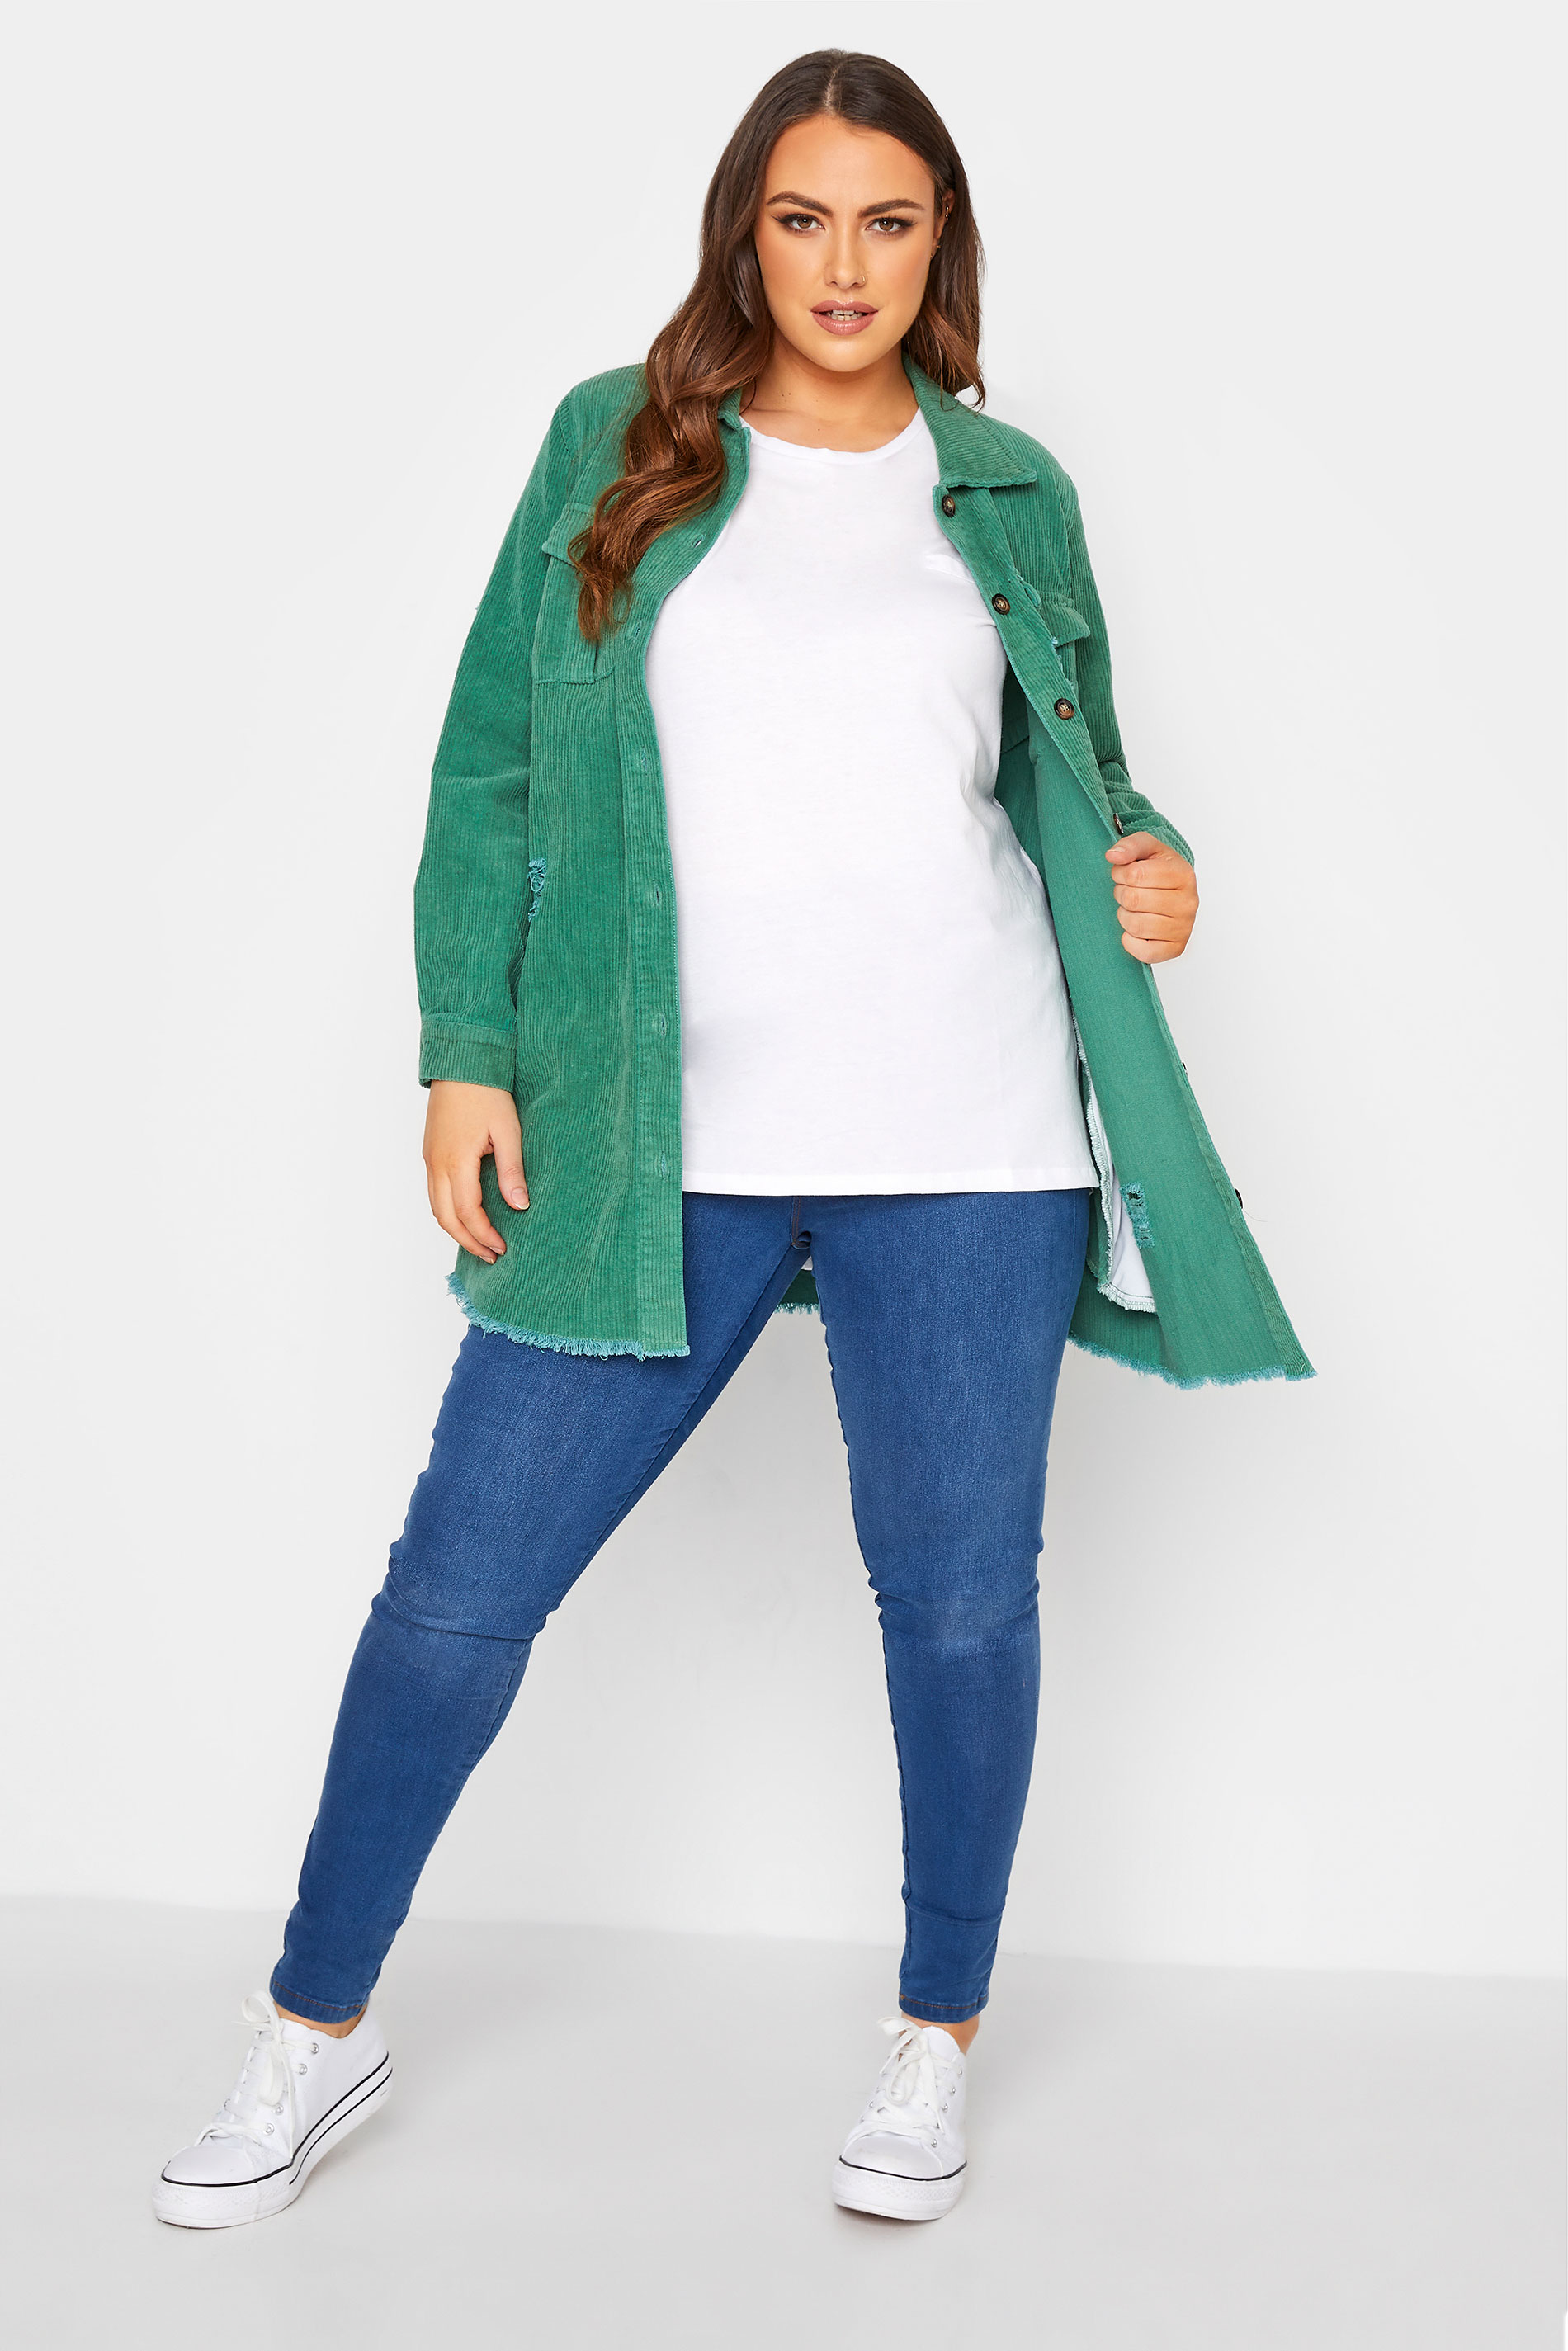 Grande taille  Tops Grande taille  Tops Casual | YOURS FOR GOOD - T-Shirt Blanc en Coton Mixte - UM28013